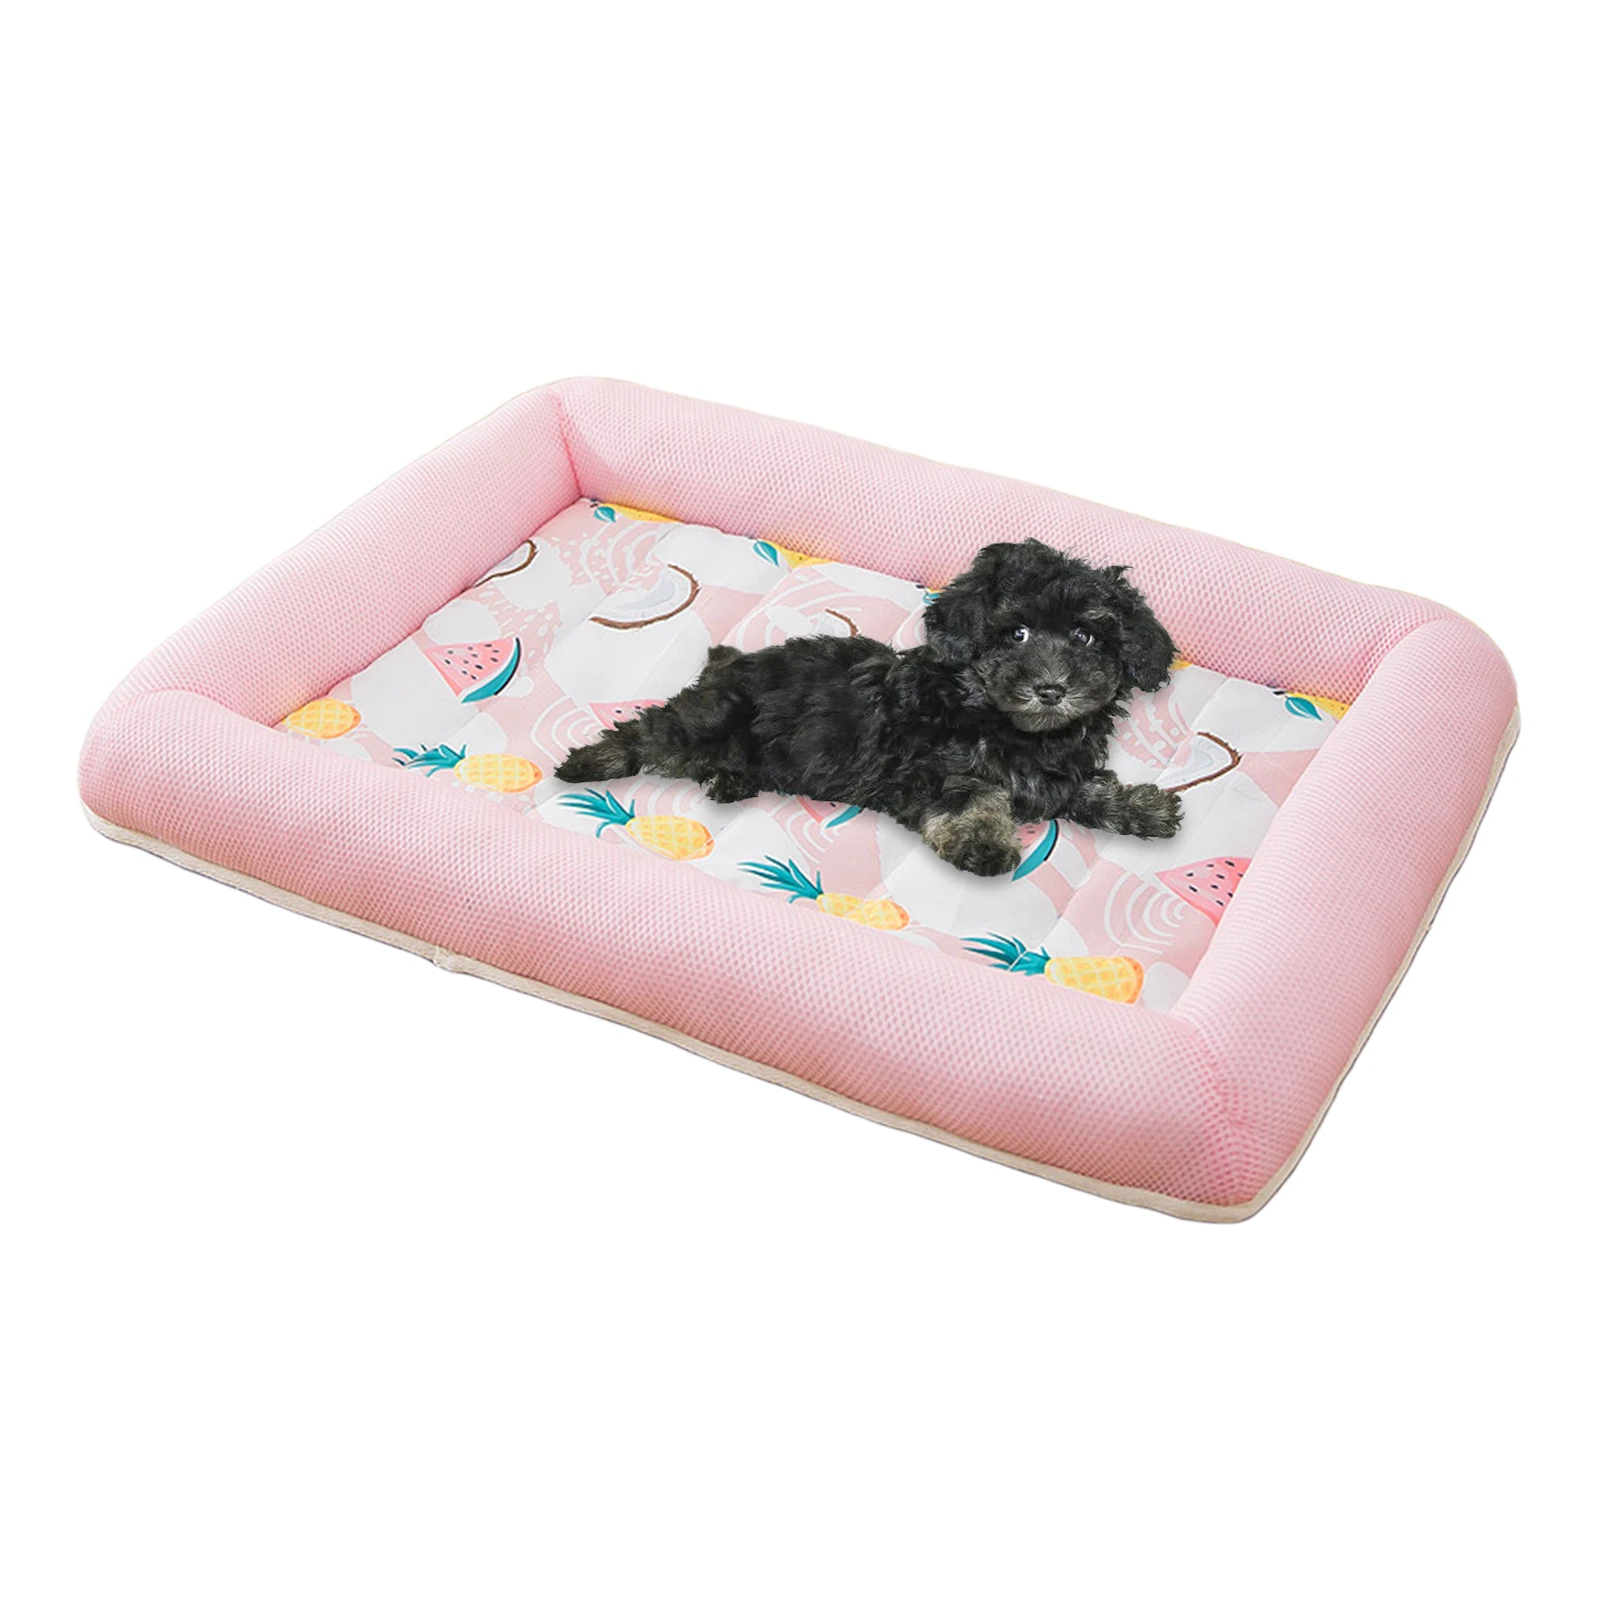 Summer Soft Dog Cooling Mat Bed Portable Sleeping Pad Washable Kennel Heat Relief Cool Blanket Cushion